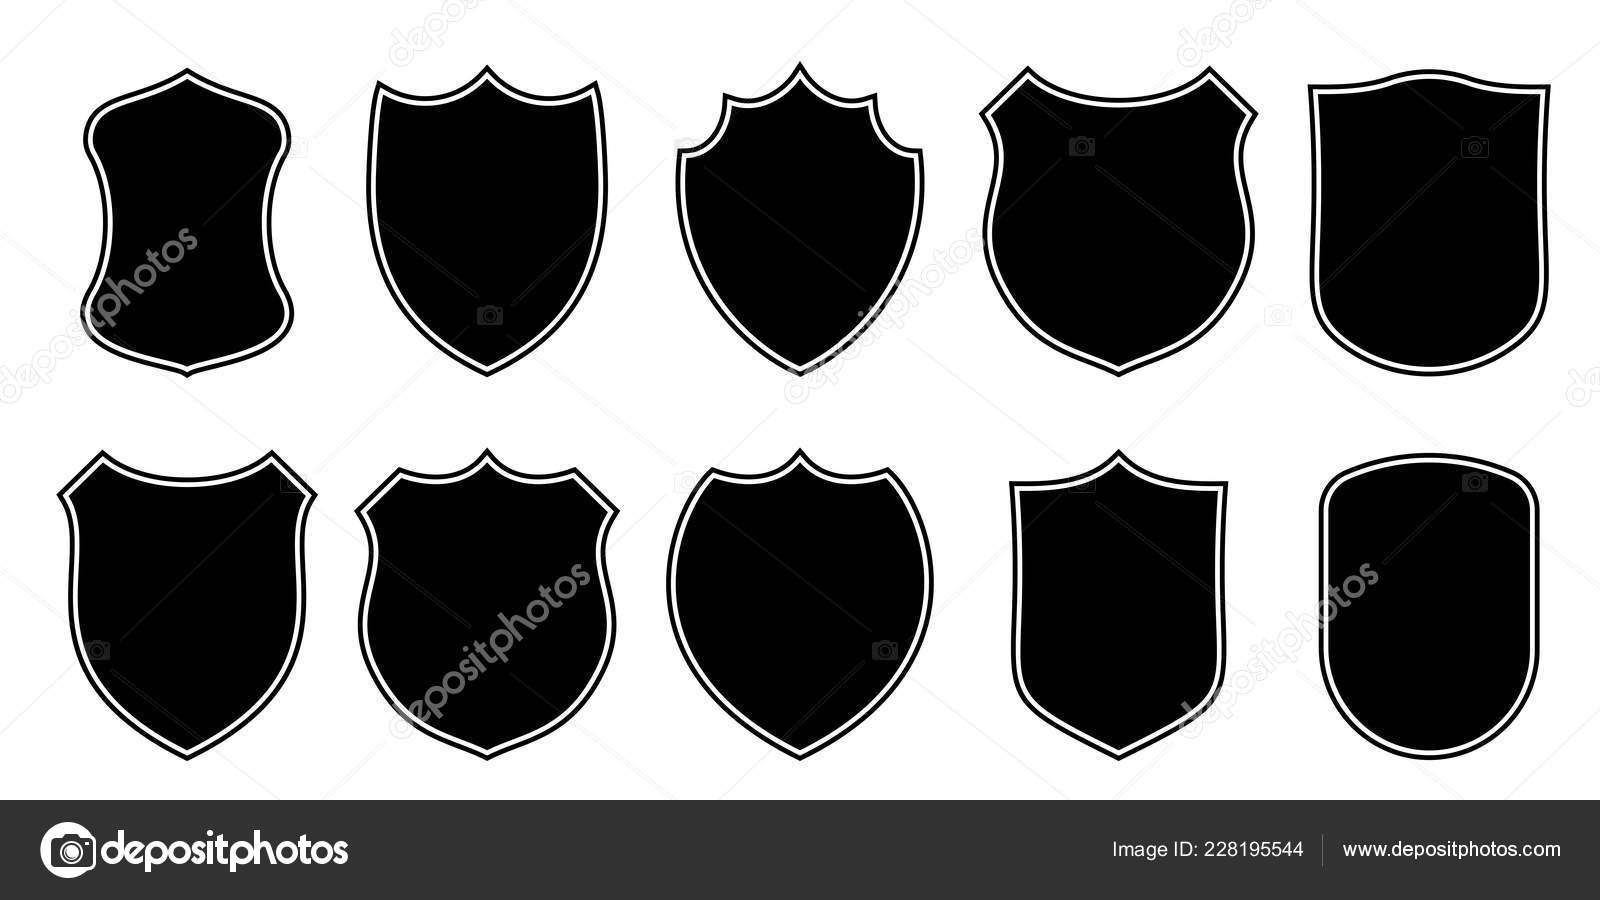 Badge Patch Shield Shape Vector Heraldic Icons Football Or Soccer Club Or Military Police Clothing Badge Patch Blank Black Templates Isolated Set Stock Vector Image By C Avector 228195544